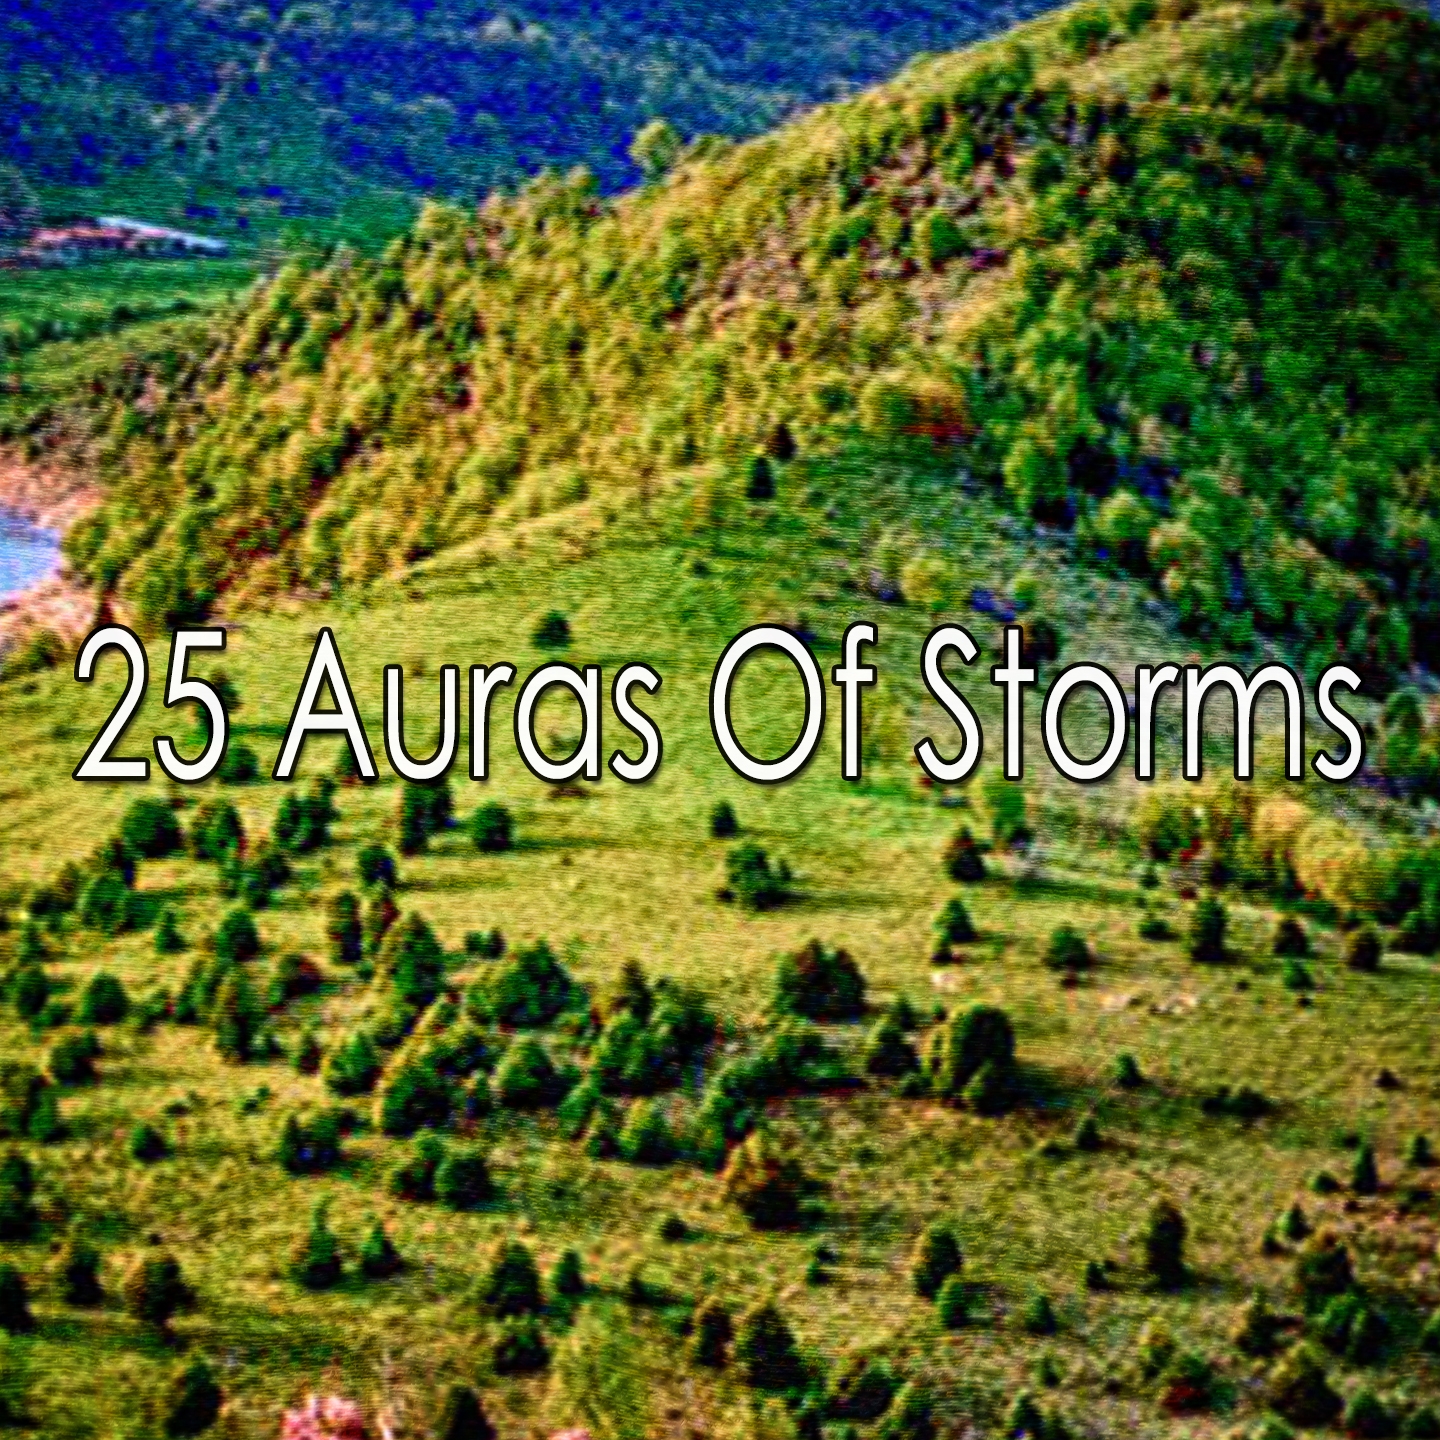 25 Auras Of Storms